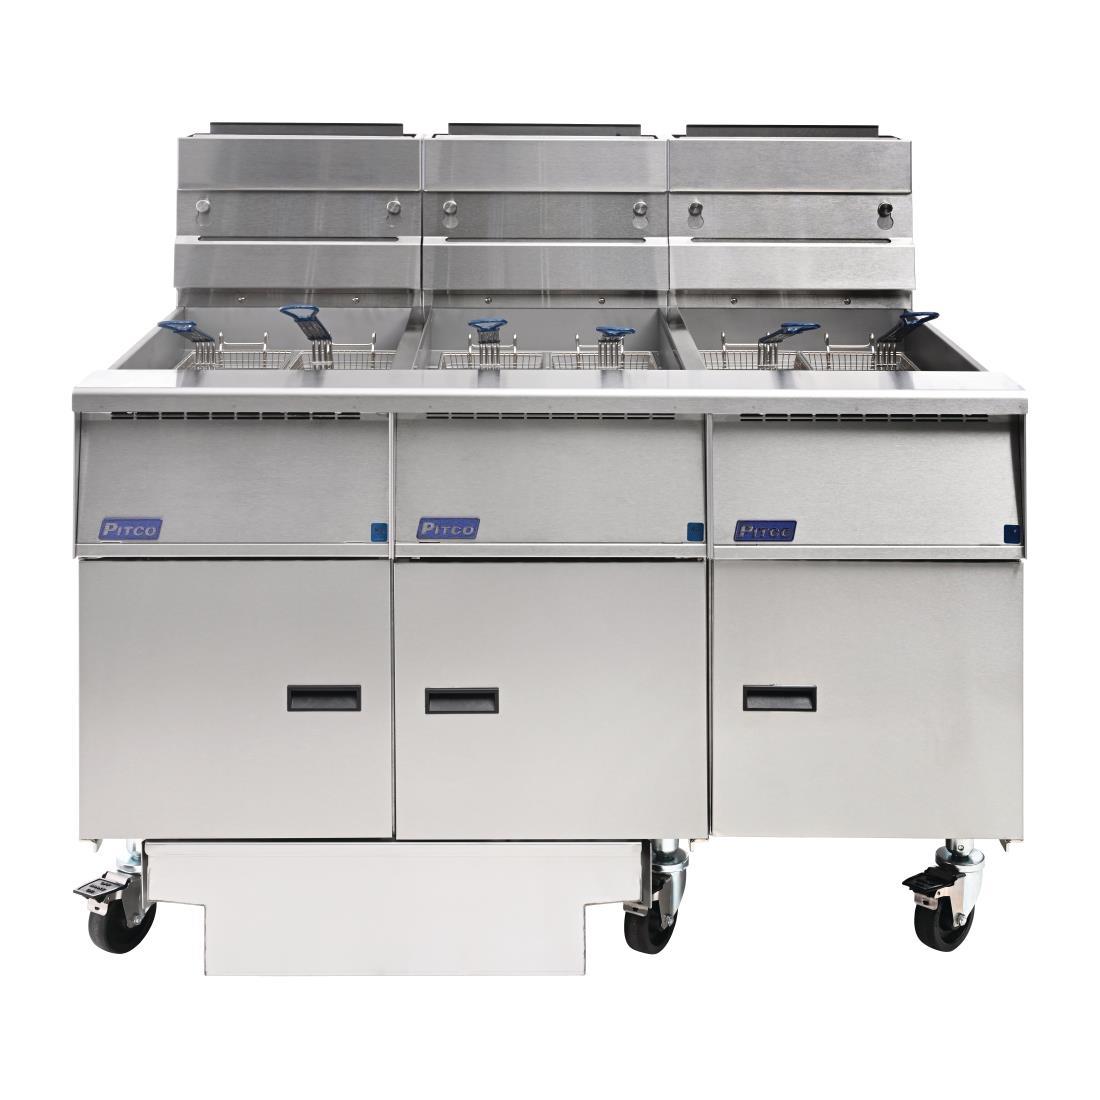 Pitco Triple Tank Natural Gas Solstice Fryer with Filter Drawer G14S/FD-FFF - FS129-N  - 3